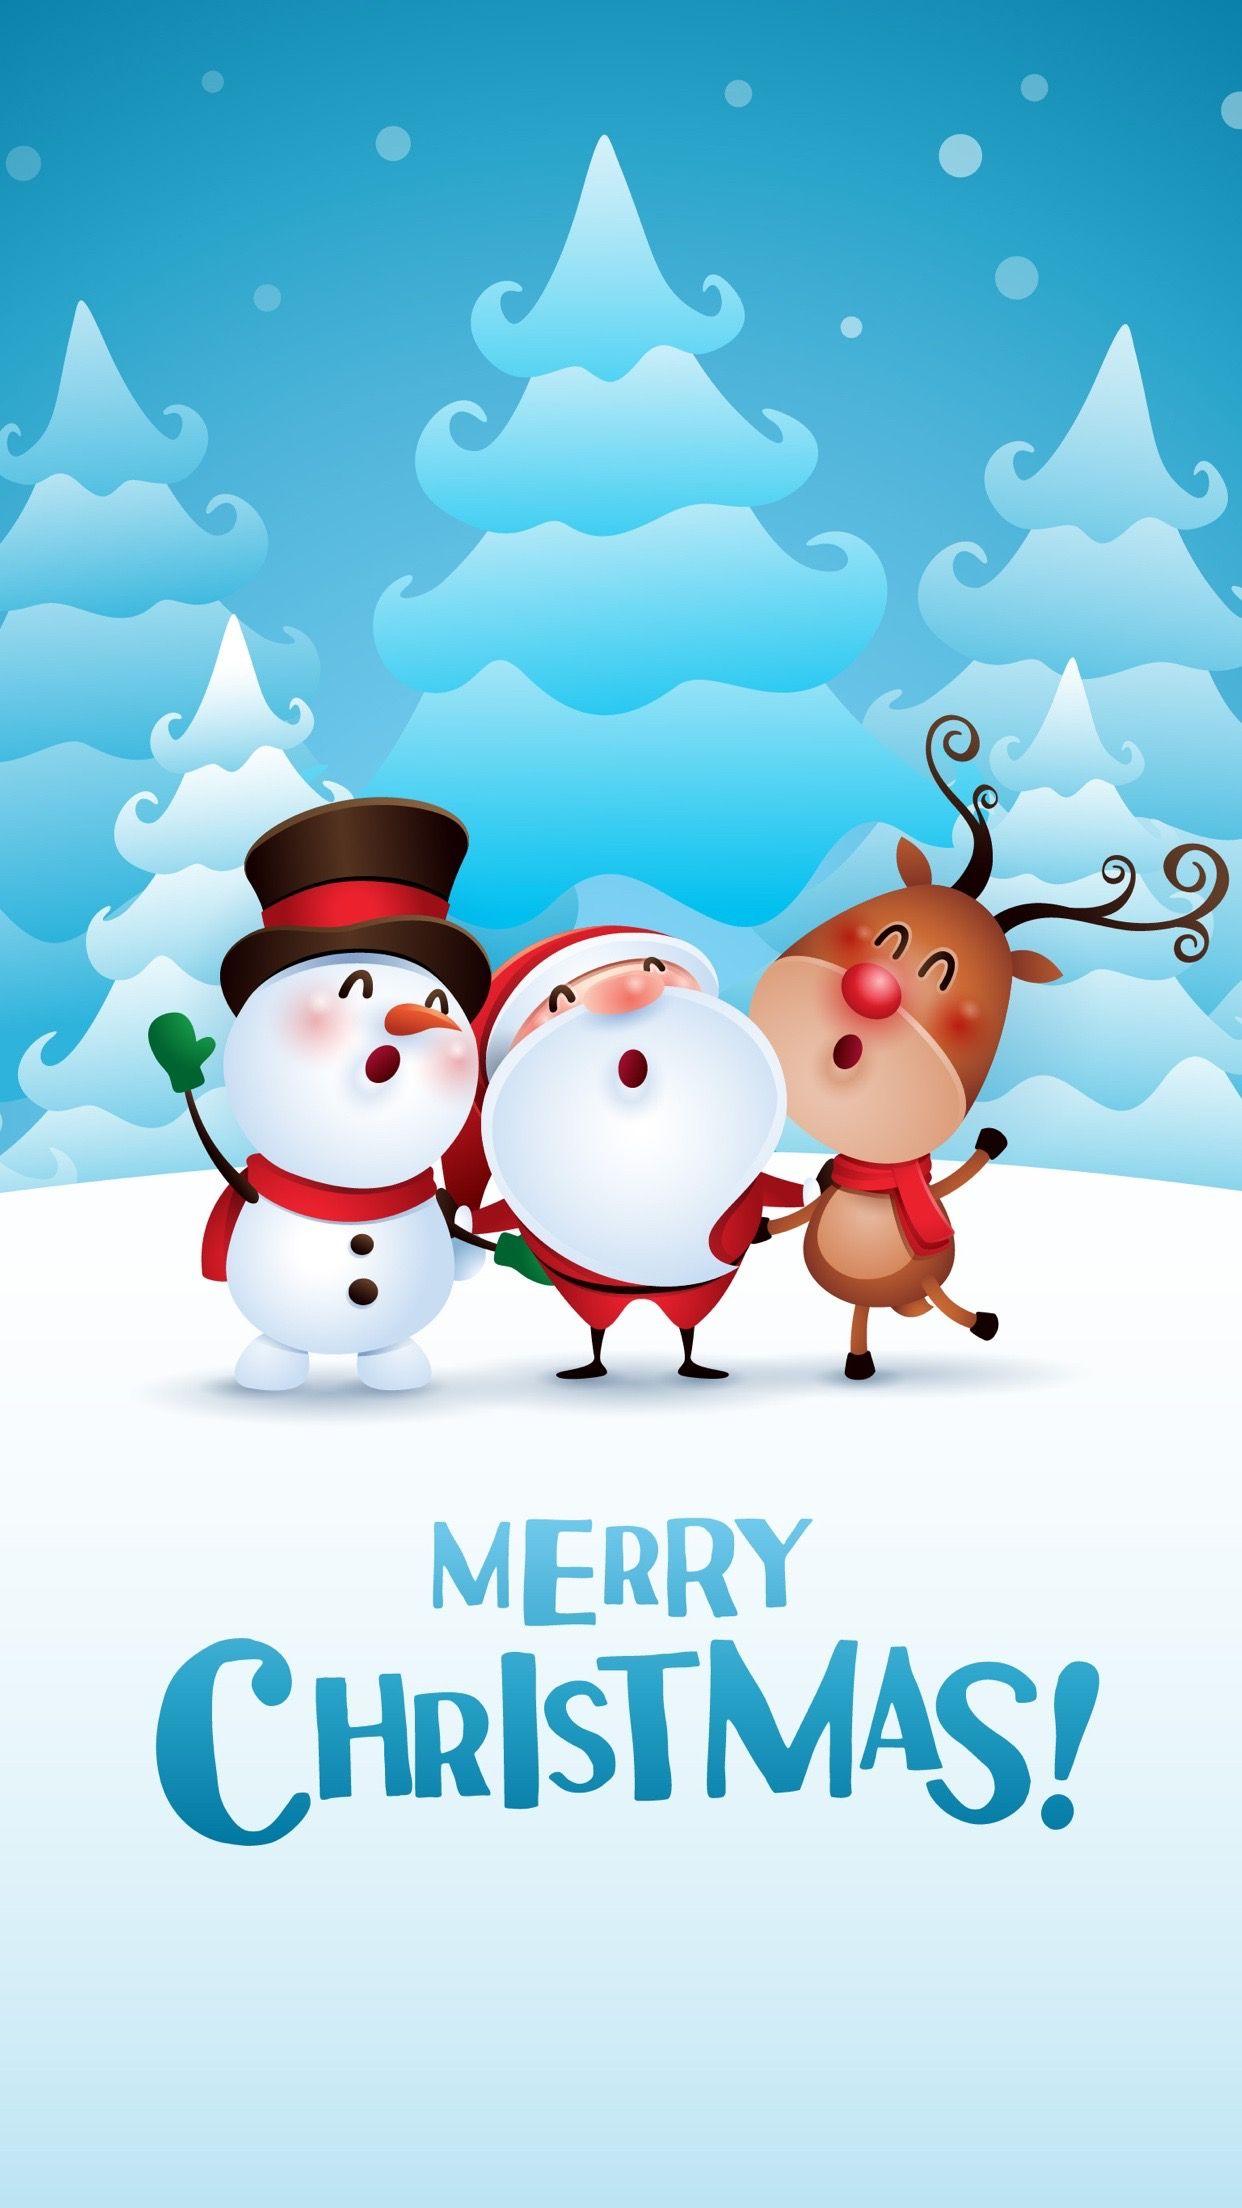 Merry Christmas Wallpaper For iPhone Christmas